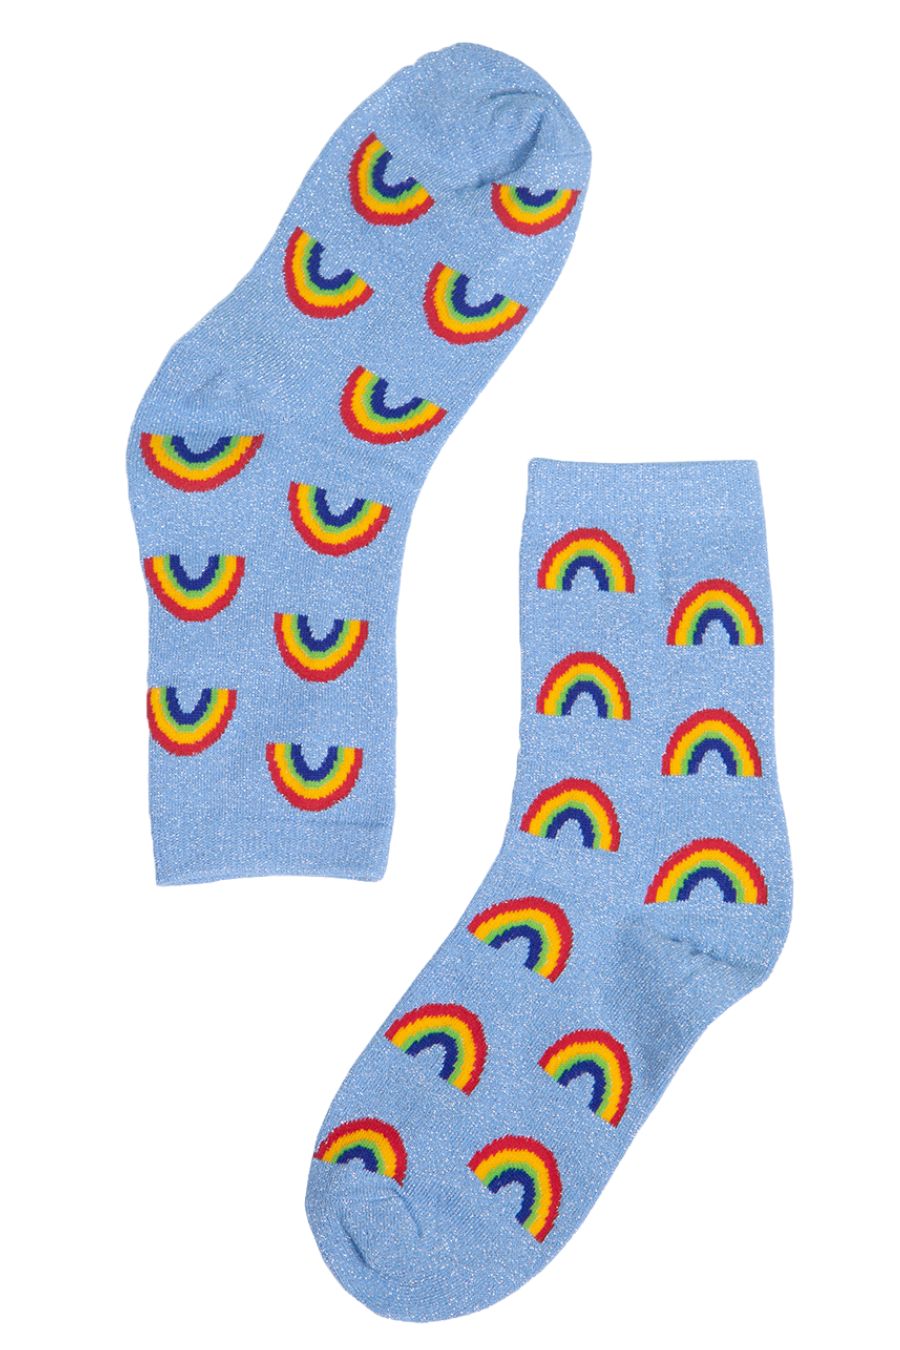 a pair of glittery blue ankle socks with a rainbow pattern